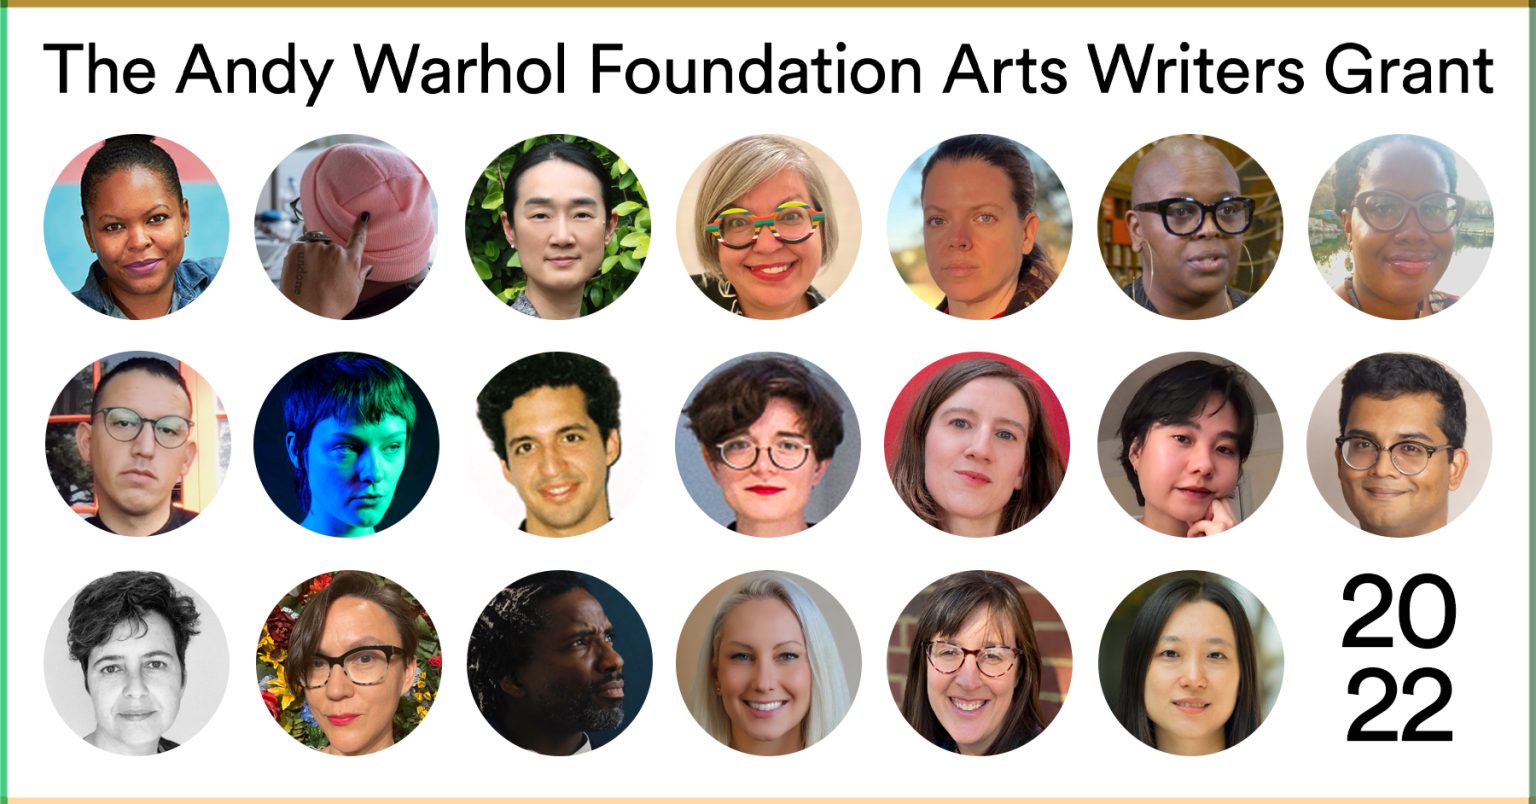 The Andy Warhol Foundation Arts Writers Grant Announces 2022 Grantees